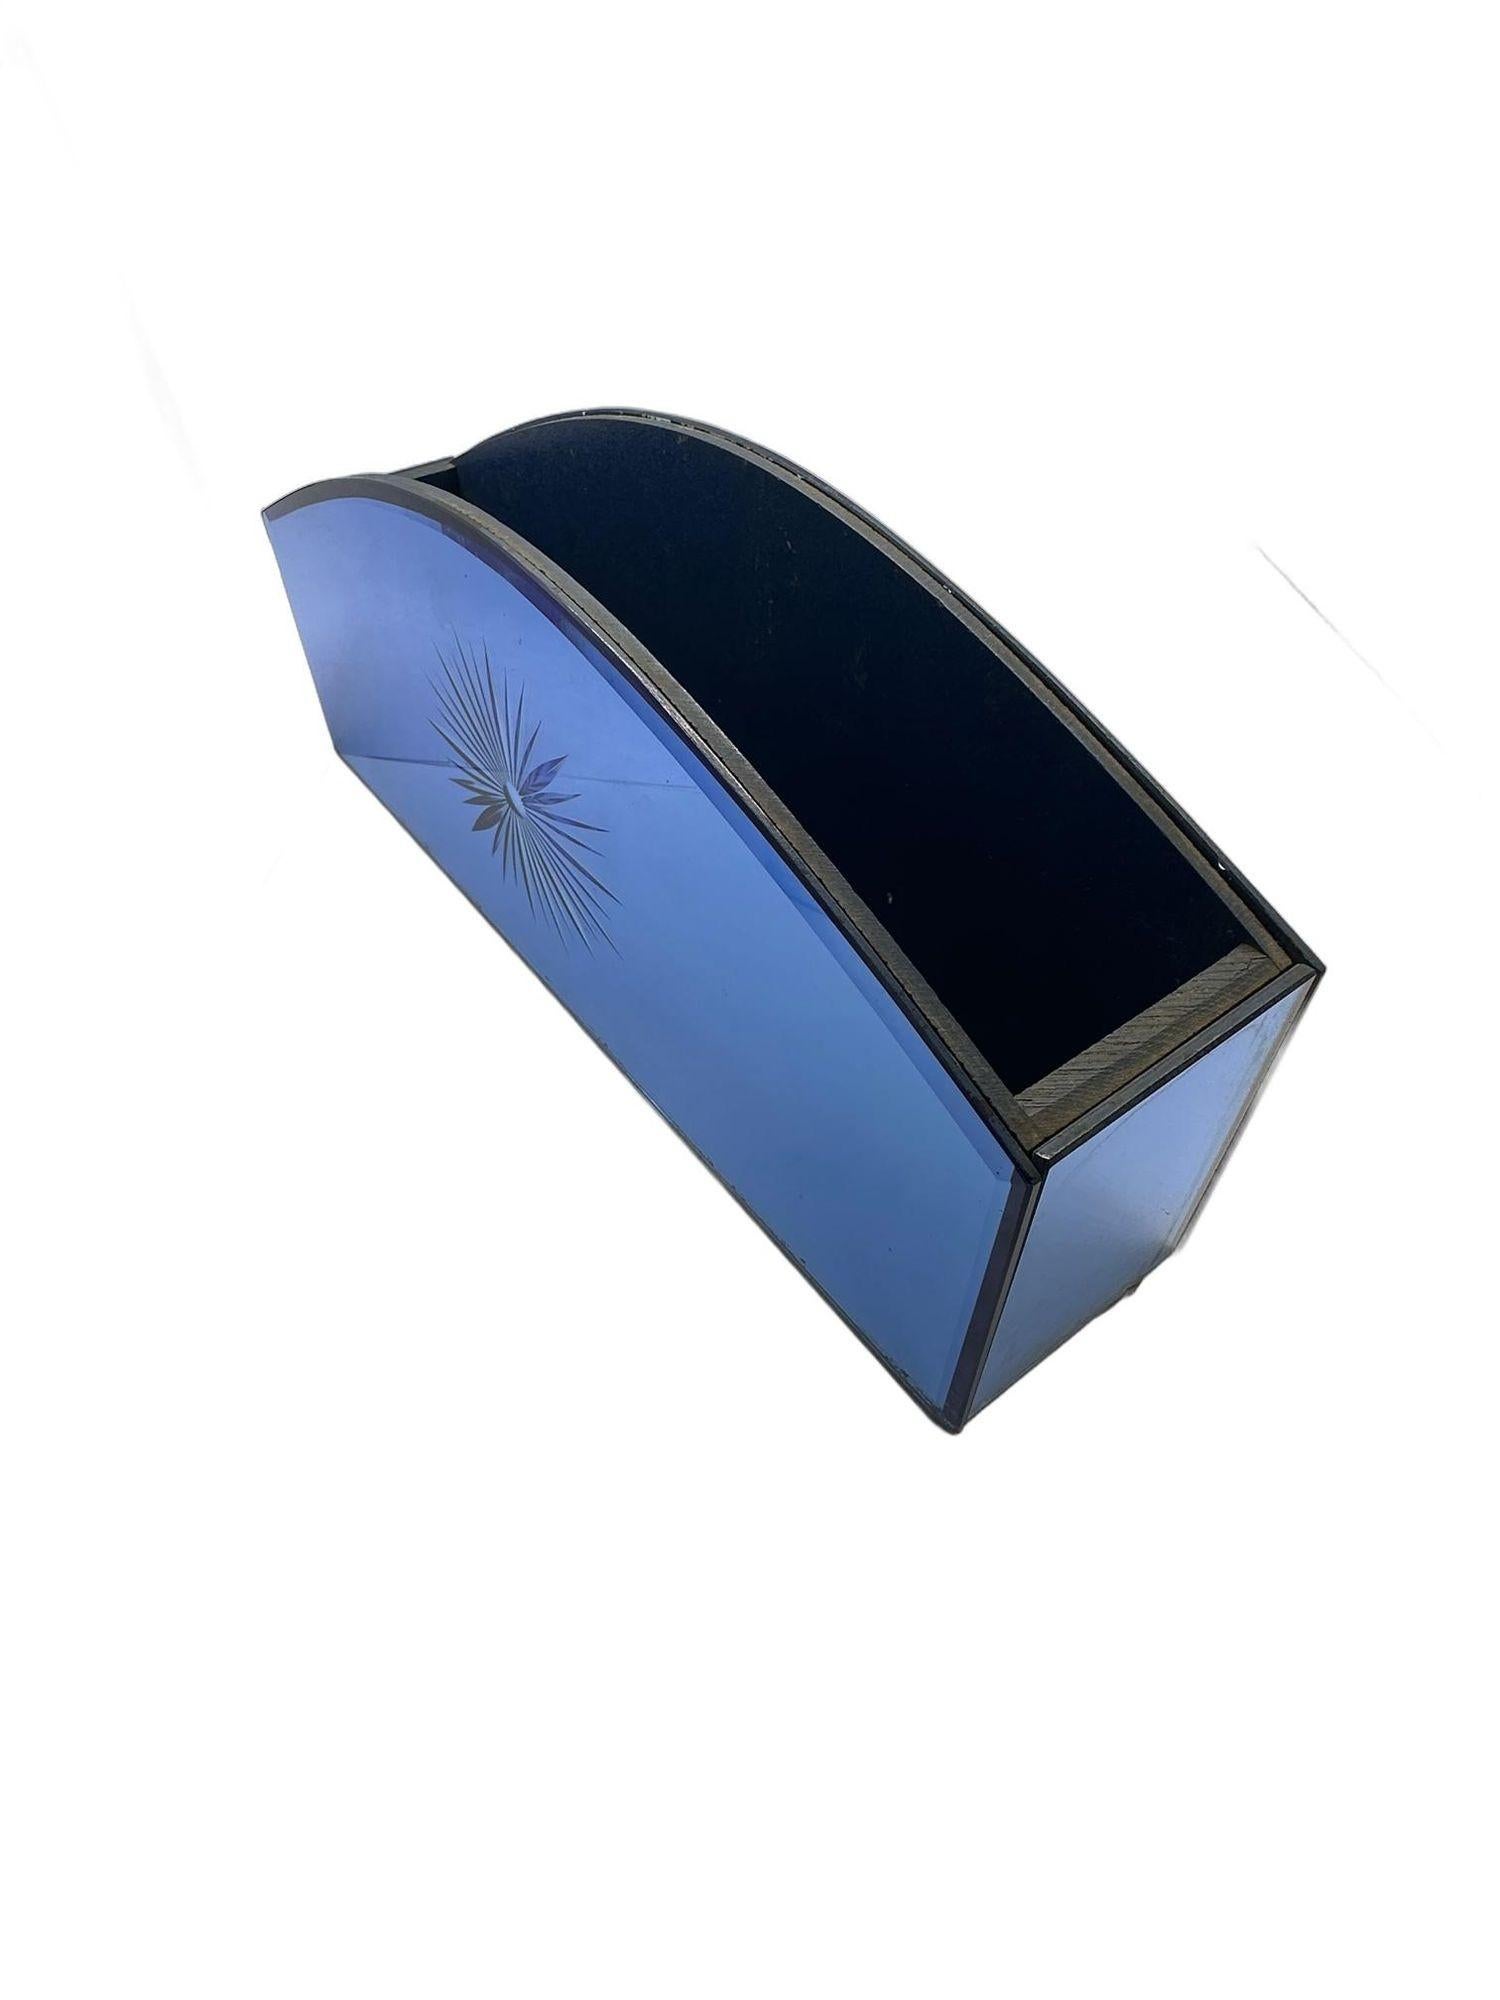 A vintage bold cobalt blue glass mail organizer with an etched sunburst design is both elegant and functional. The bright deep blue hue adds sophistication, while the sunburst design adds a touch of warmth and style. It's a practical yet beautiful